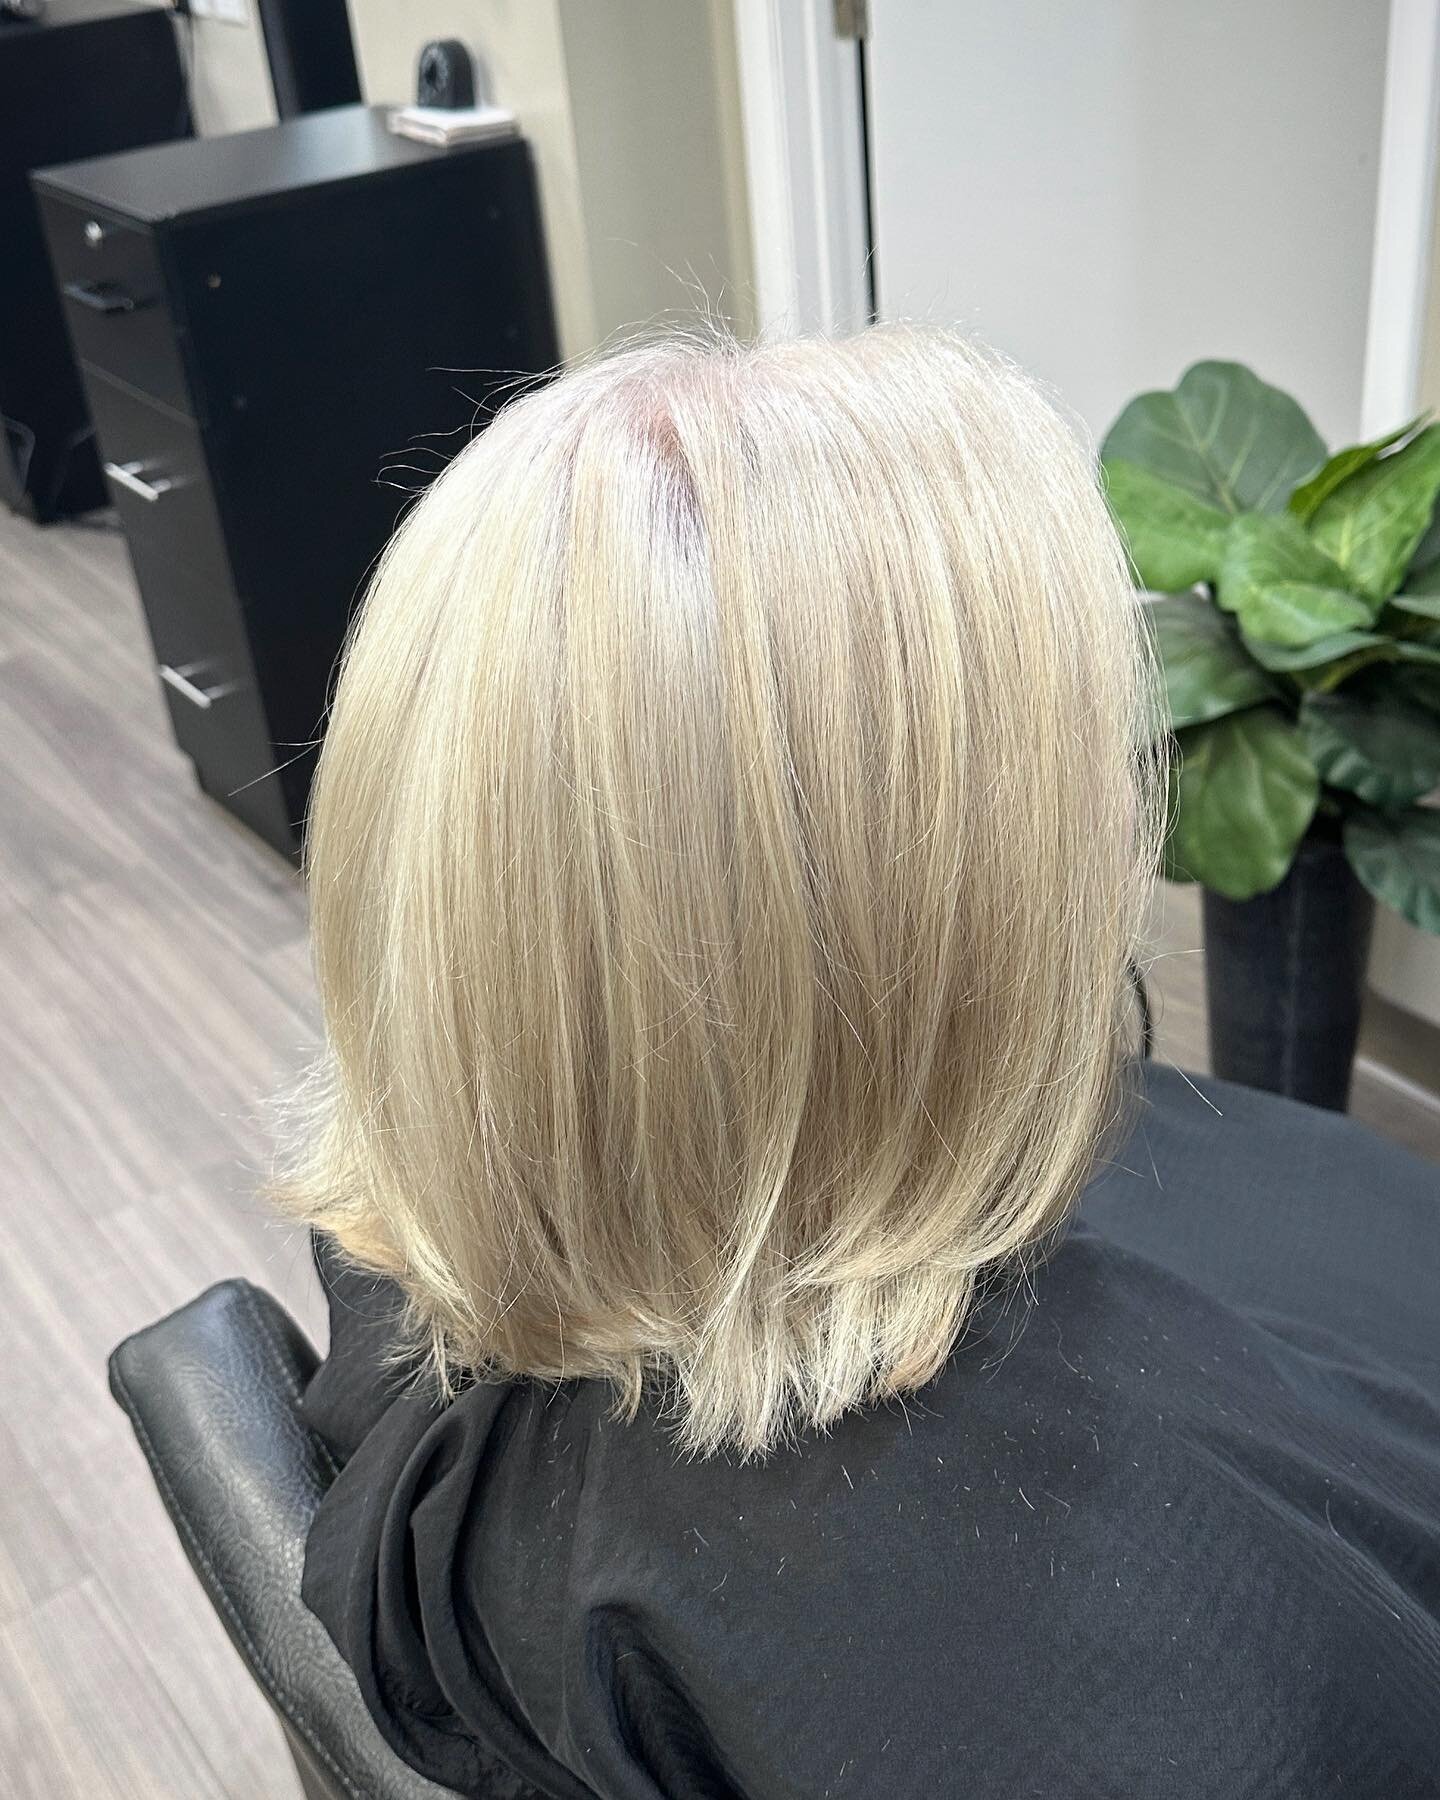 First step on the journey  to match this clients natural white hair🤍
&bull;
After&gt;&gt;Before
&bull;
We call it a journey because it can be unpredictable how the hair will lift from years of dye hiding under the surface color
&bull;
SUPER happy wi